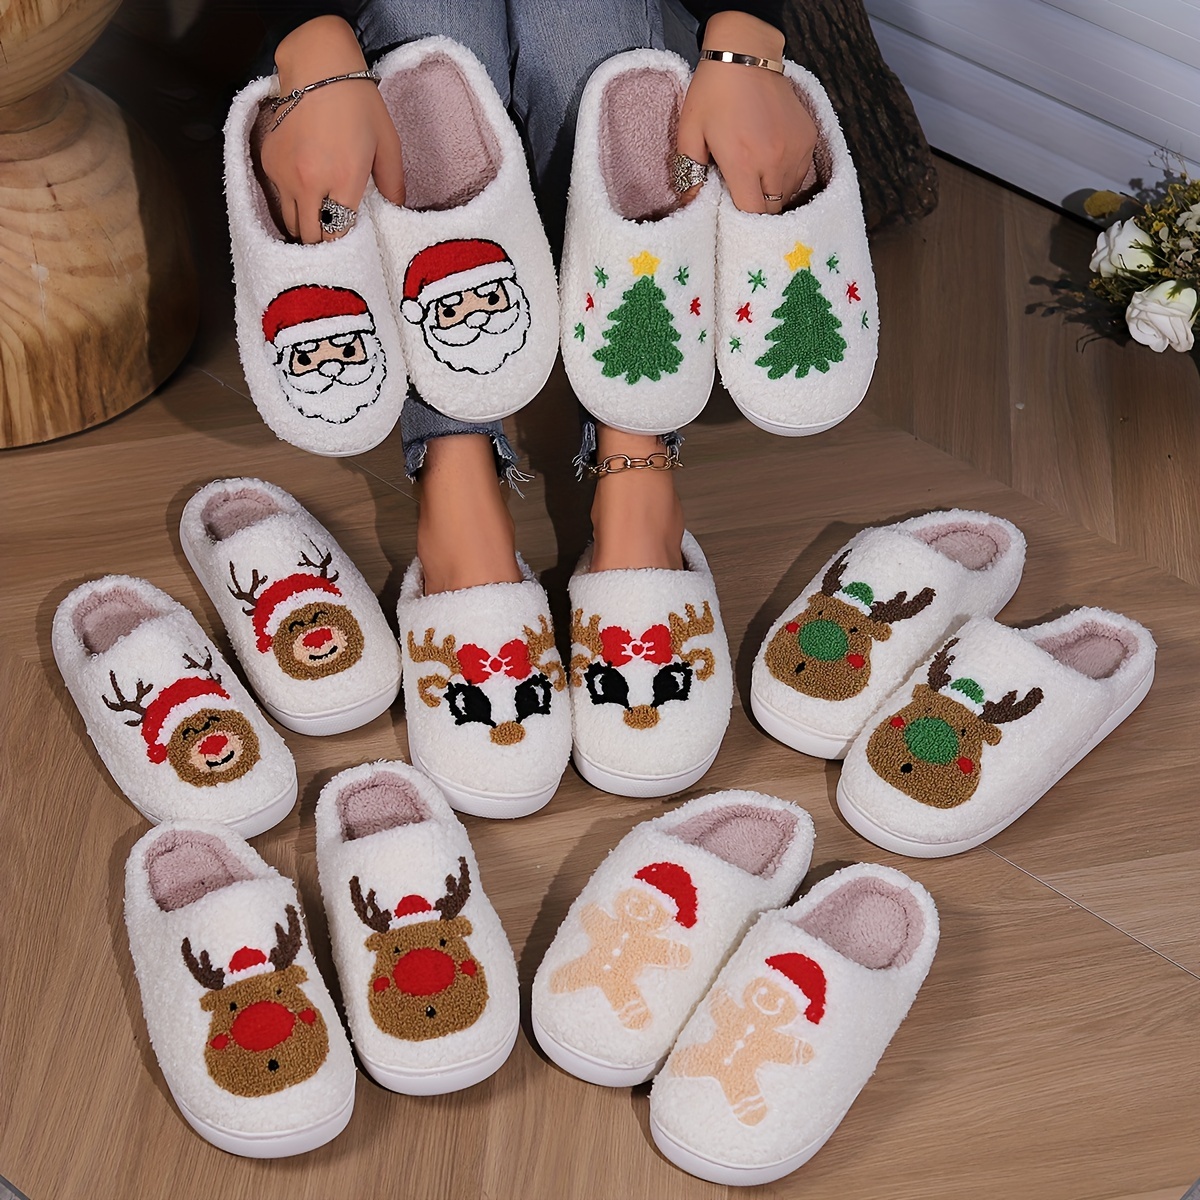 

Christmas Tree Pattern Fuzzy Slippers, Winter Warm Closed Toe Flat Floor Shoes, Cozy Soft Sole Plush Home Slippers